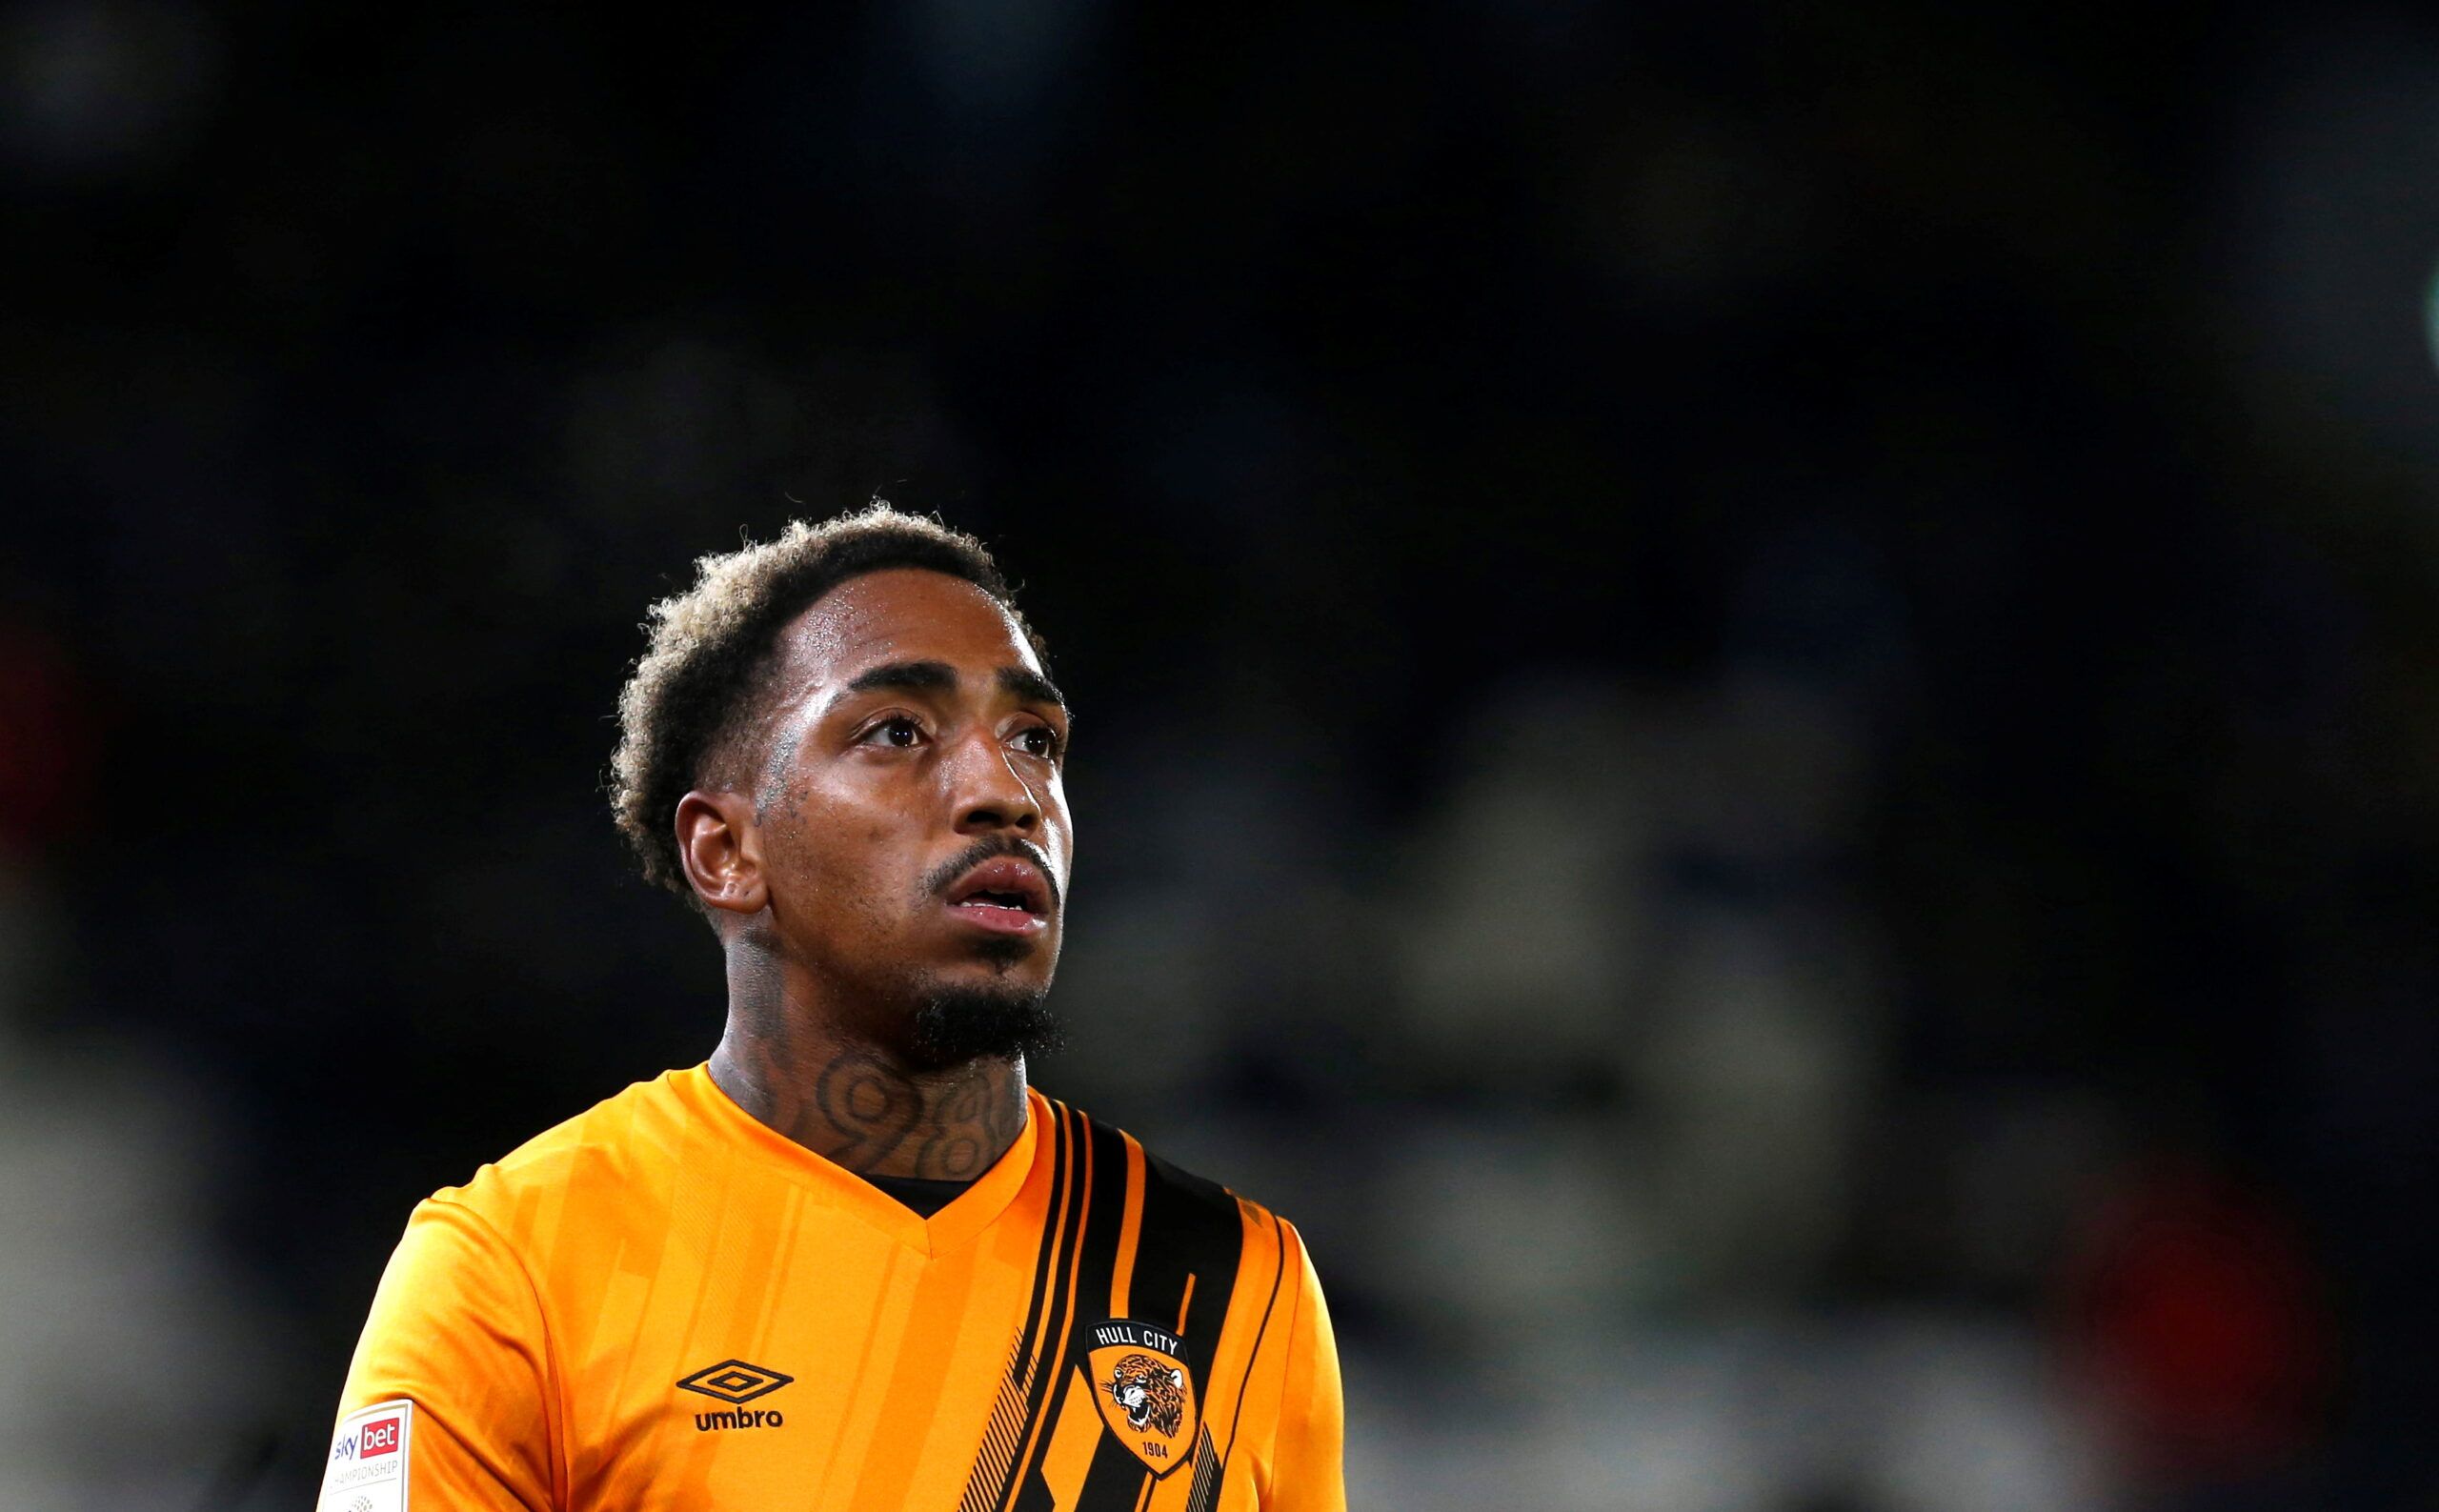 Soccer Football - Championship - Hull City v Peterborough United - KCOM Stadium, Hull, Britain - October 20, 2021  Hull City's Mallik Wilks  Action Images/Craig Brough  EDITORIAL USE ONLY. No use with unauthorized audio, video, data, fixture lists, club/league logos or 